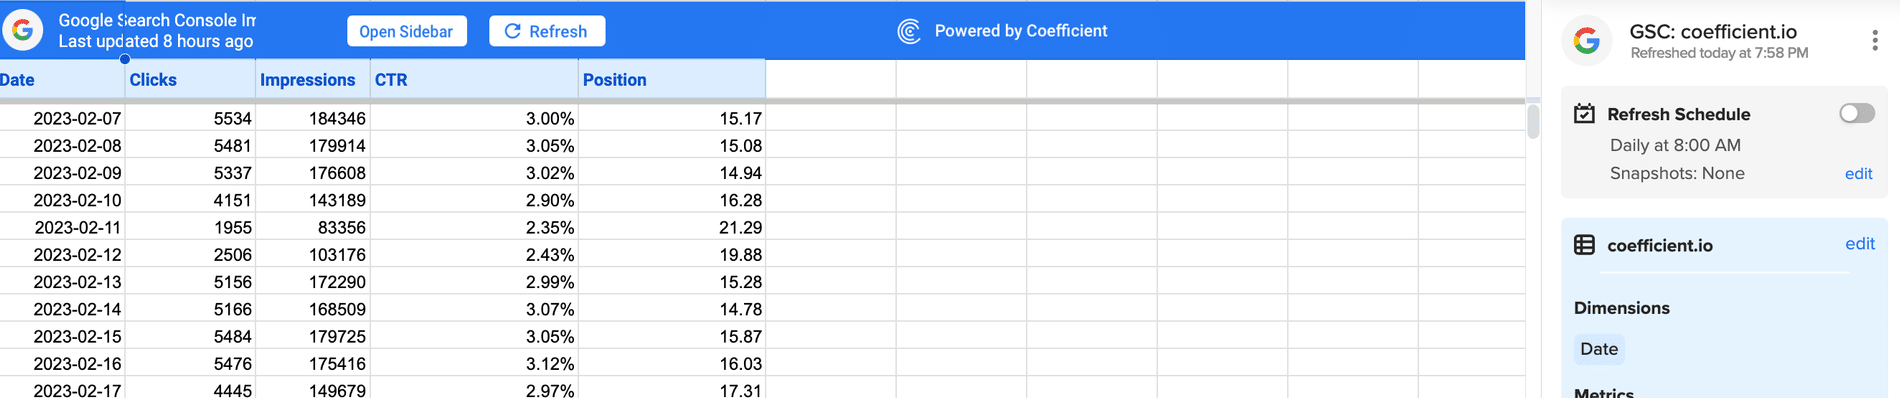 google search console data automatically populated in a spreadsheet